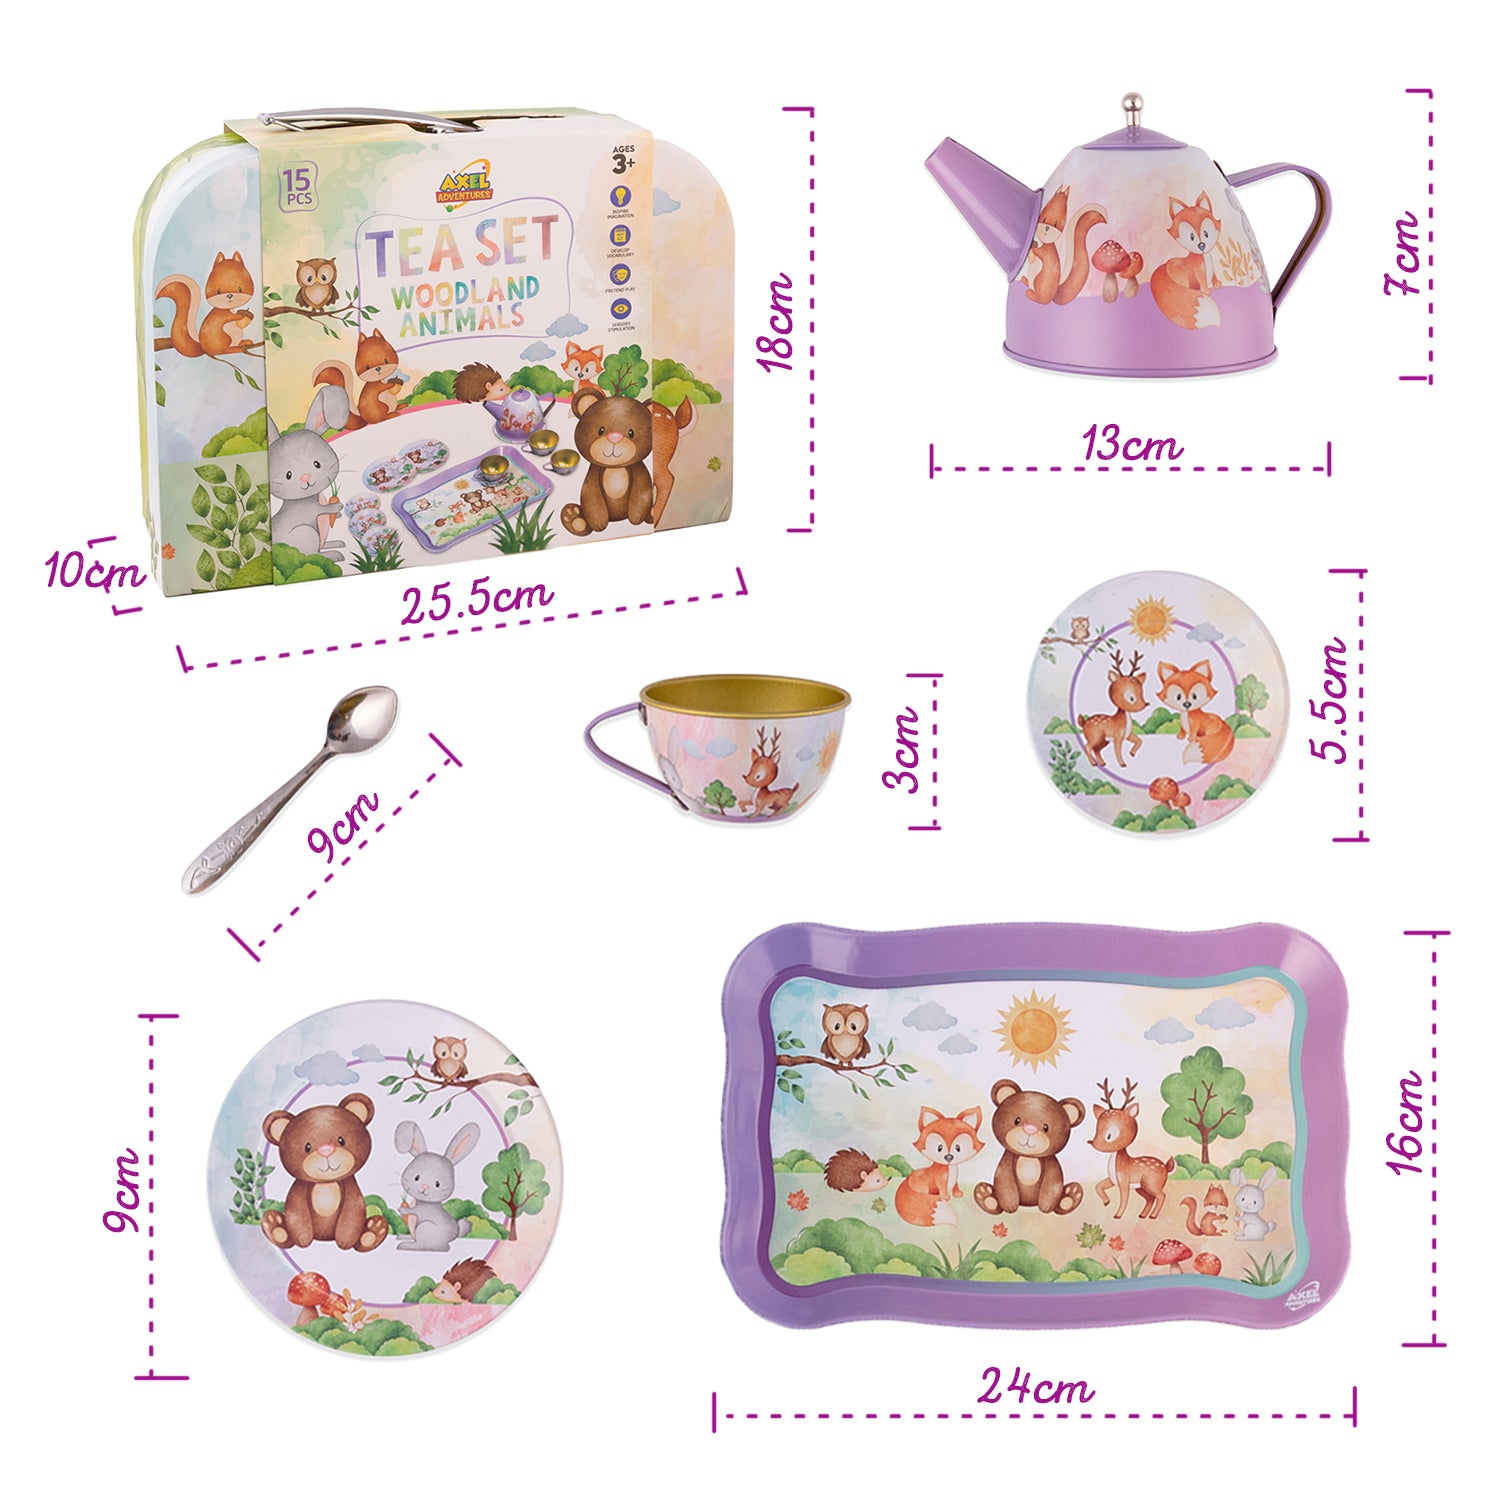 Woodland Animal Themed Pretend Play Tea Set for Little Girls - 15 PCS Tea Party Set for Kids Learning and Social Skills - Axel Adventures